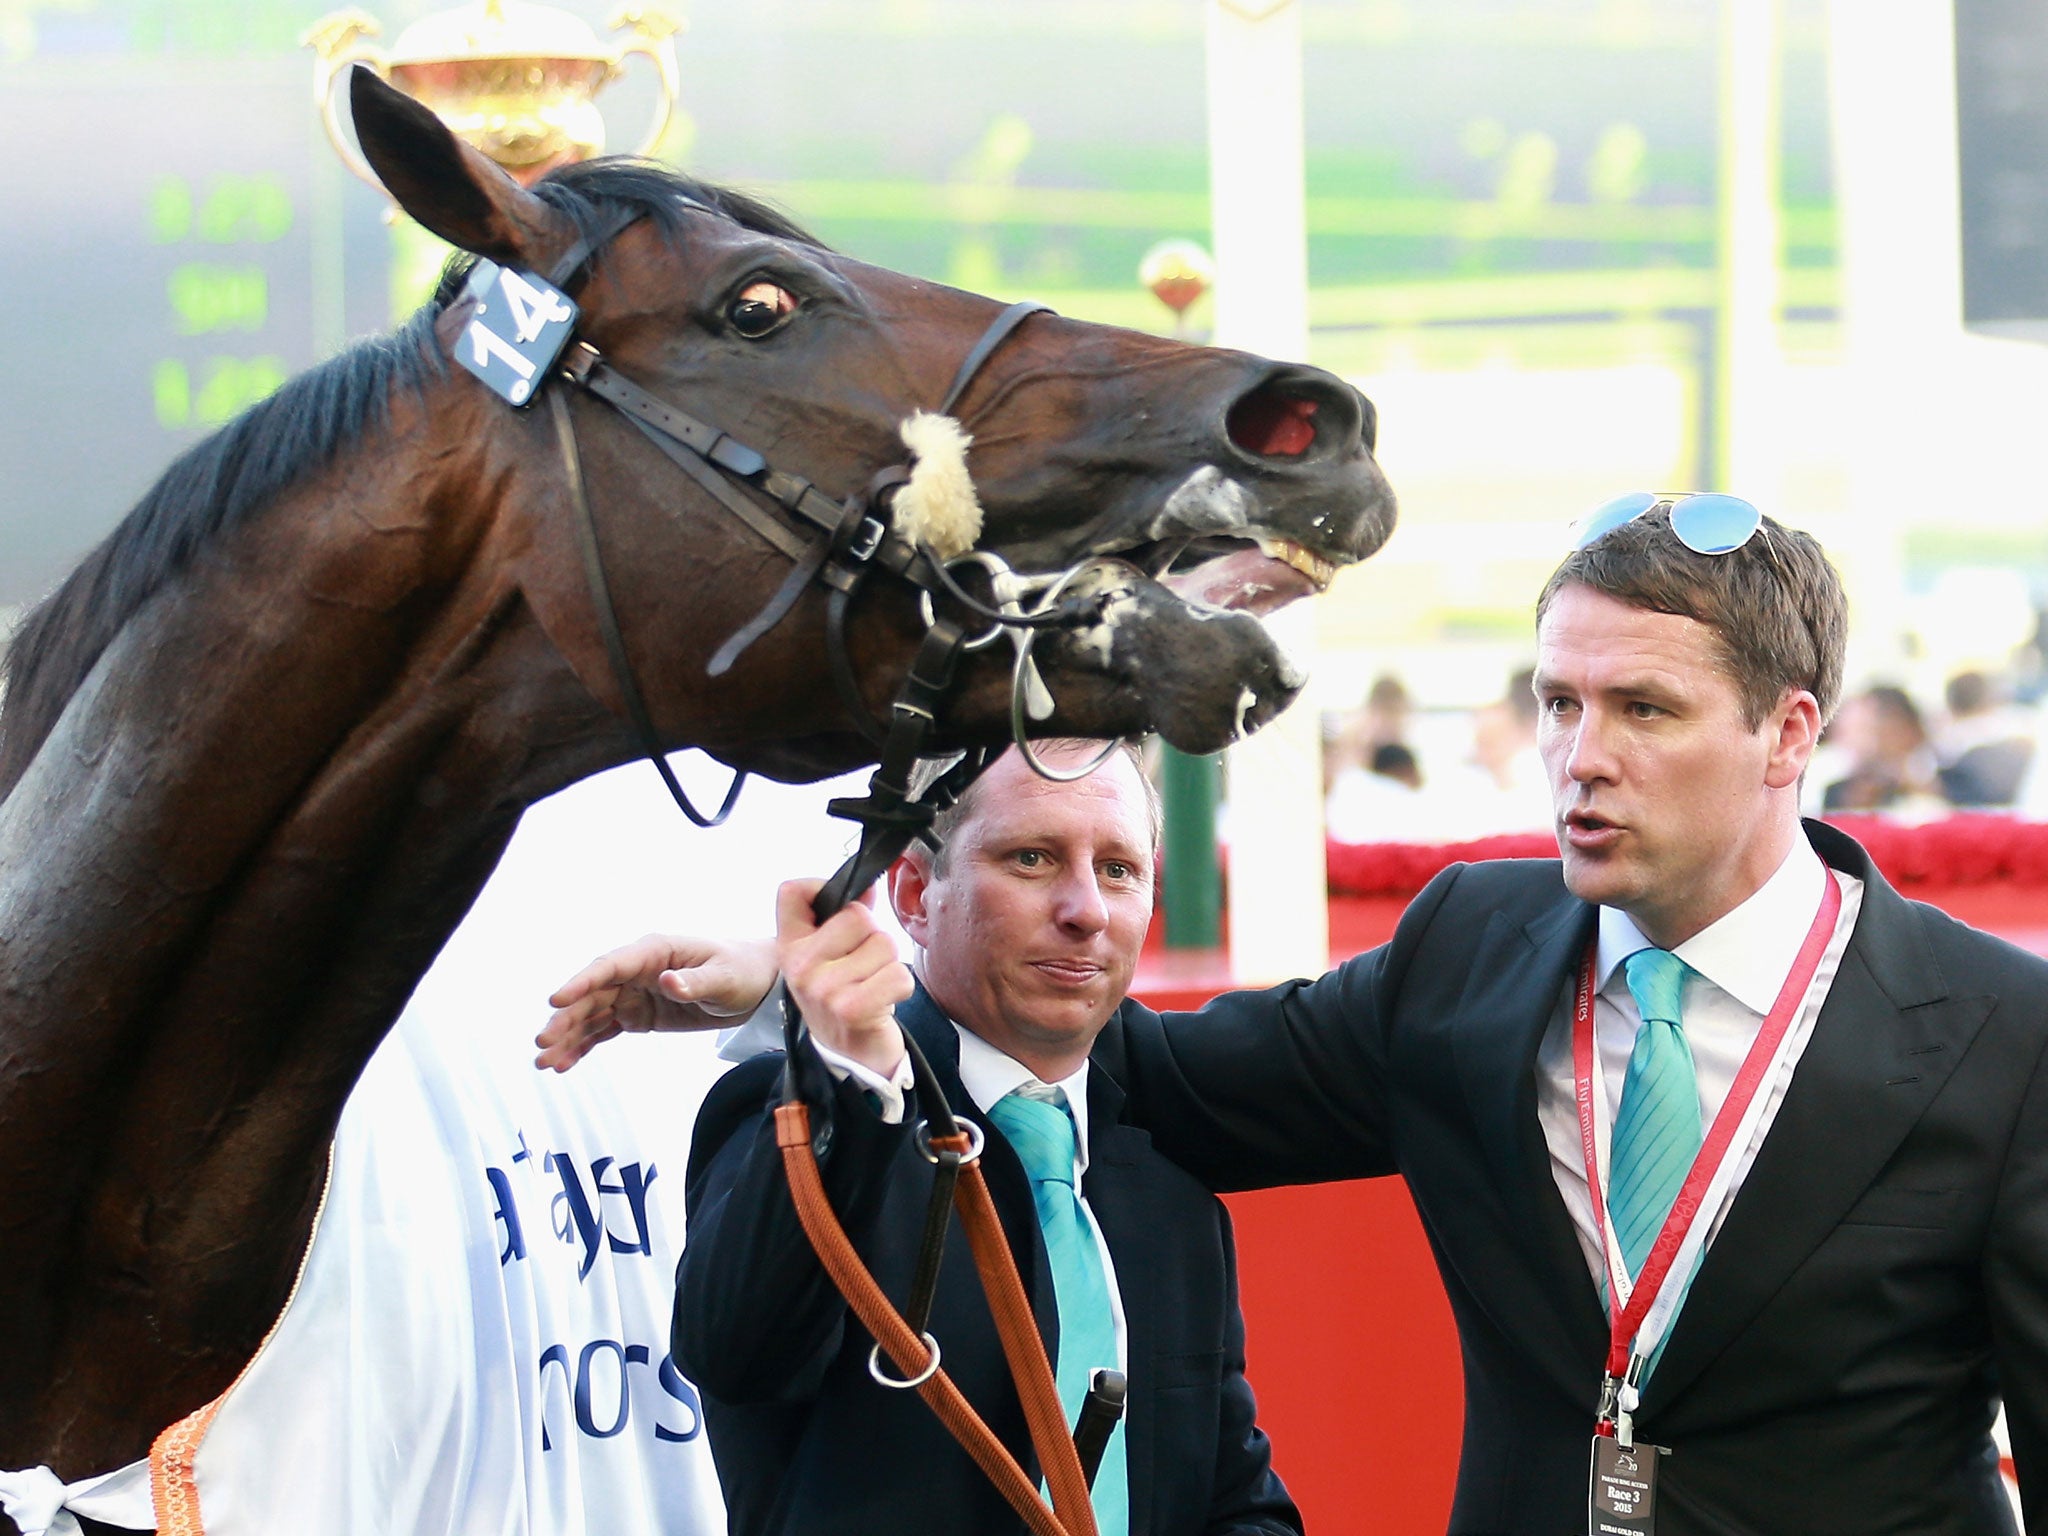 Former England international footballer Michael Owen and trainer Tom Dascombe pose with Brown Pather after winning Dubai Gold Cup during the Dubai World Cup earlier this year